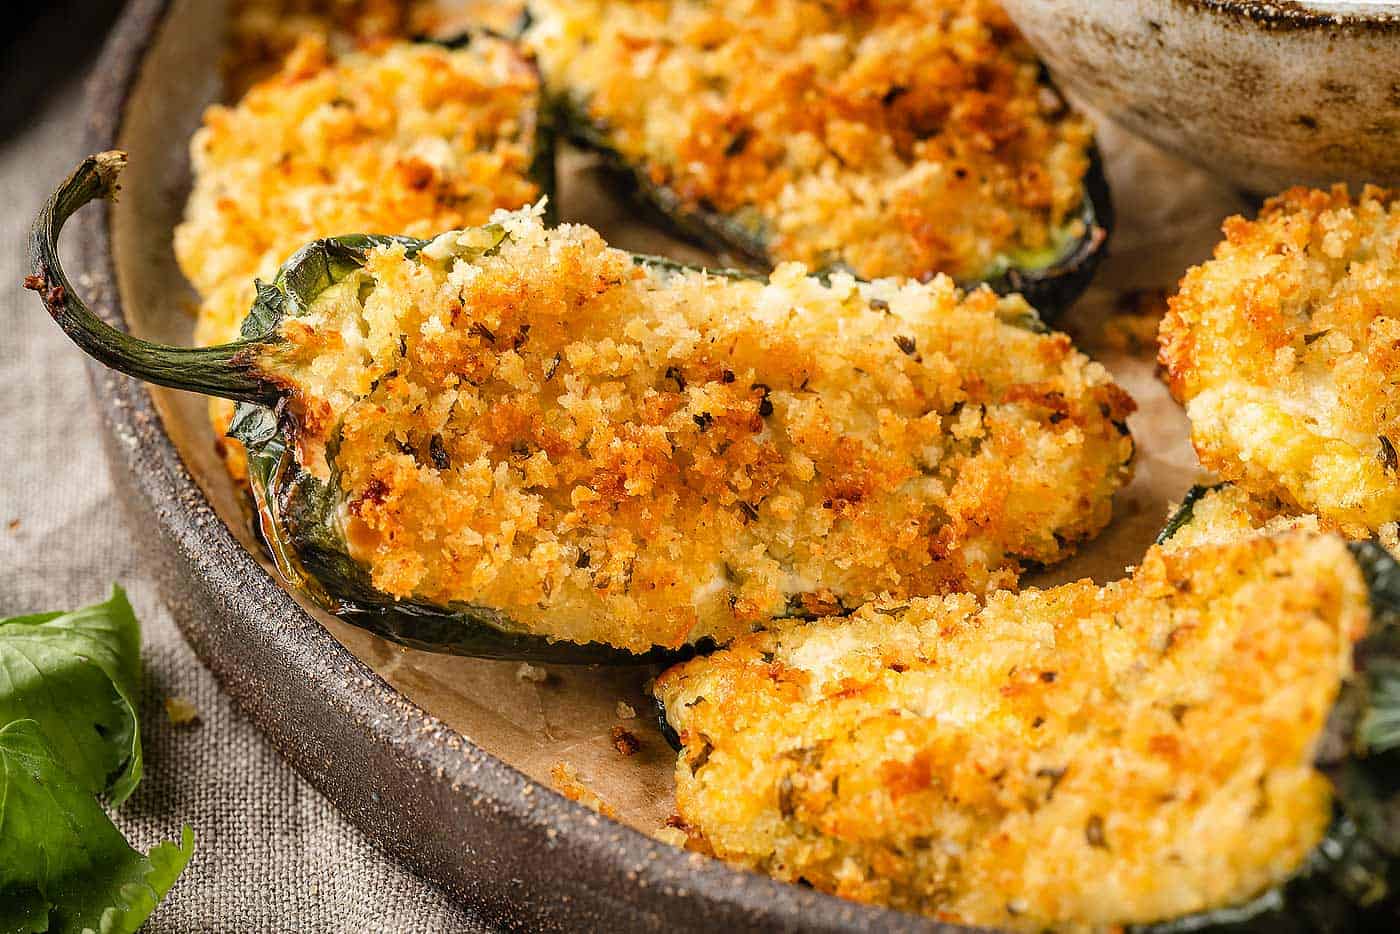 A close up image of air fried jalapeno popper.